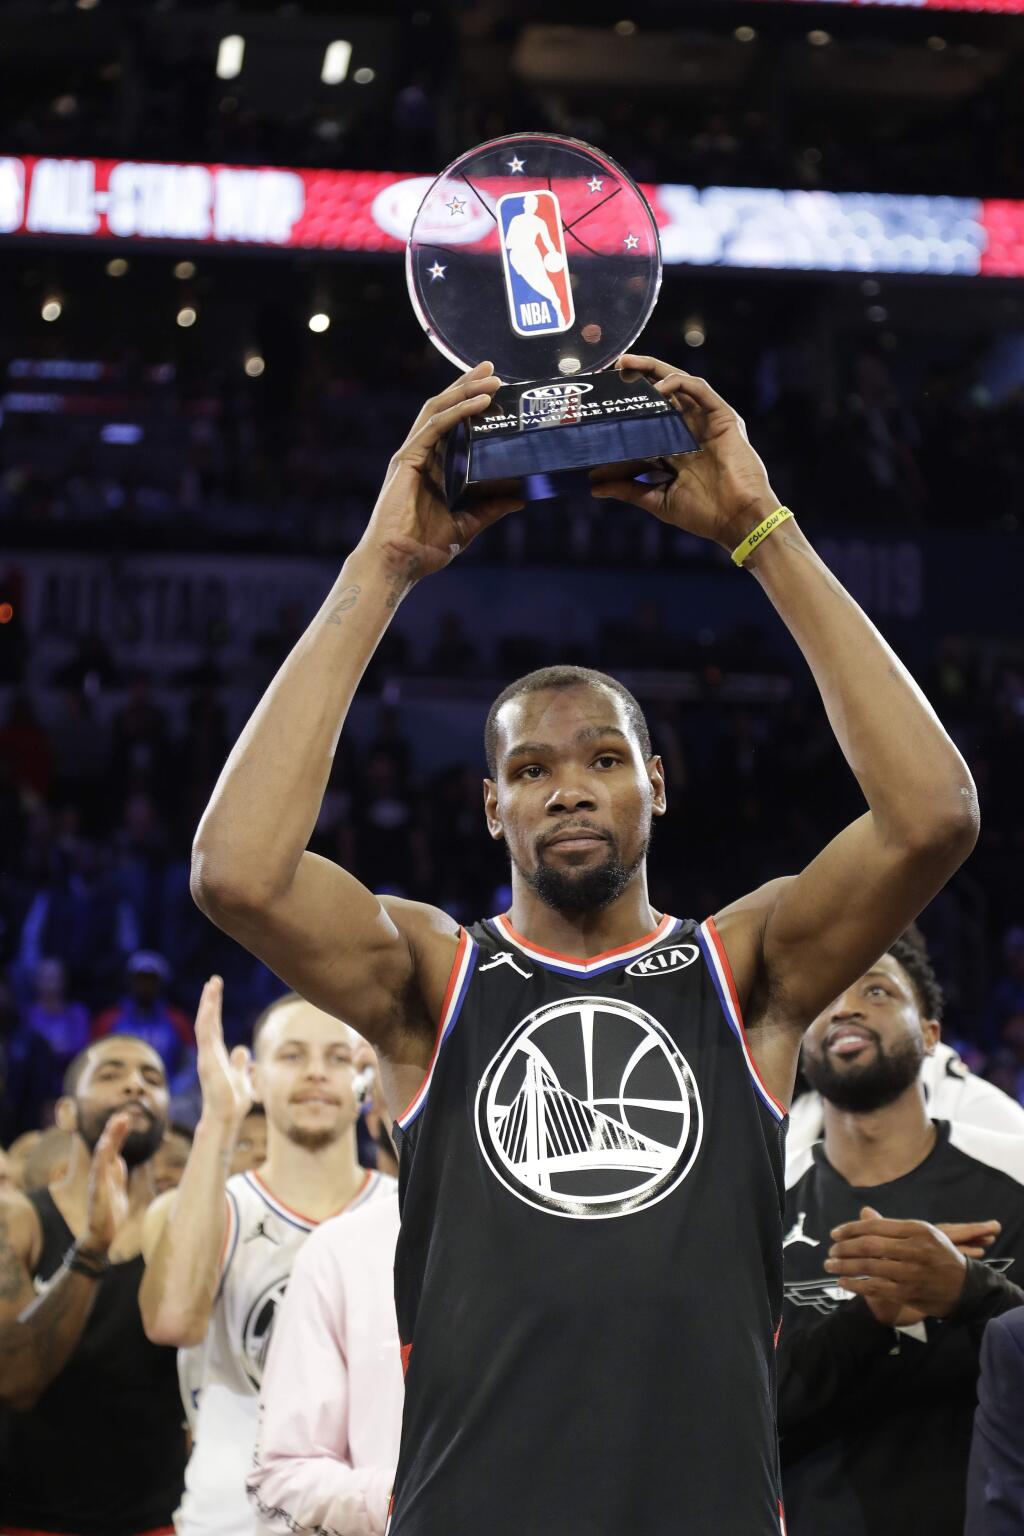 Team LeBron's Kevin Durant, of the Golden State Warriors holds his MVP trophy after the NBA All-Star basketball game, on Sunday, Feb. 17, 2019, in Charlotte, N.C. The Team LeBron won 178-164. (AP Photo/Chuck Burton)